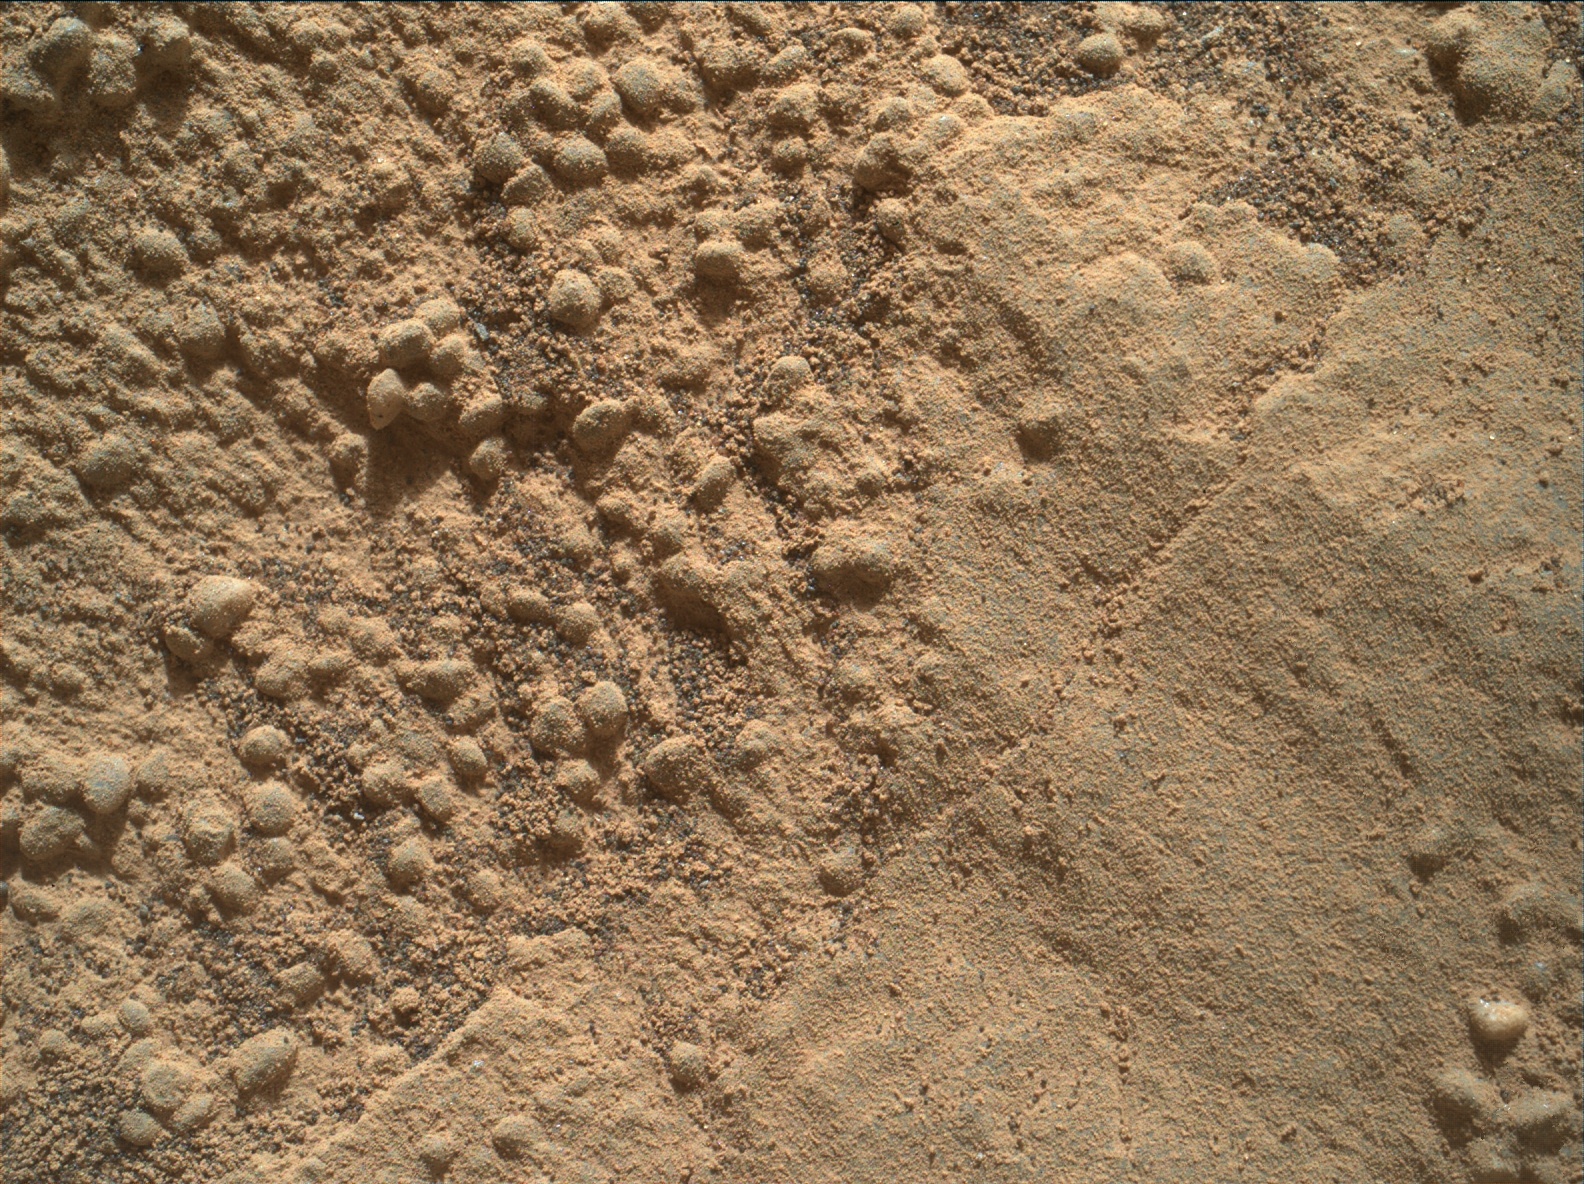 Nasa's Mars rover Curiosity acquired this image using its Mars Hand Lens Imager (MAHLI) on Sol 1343